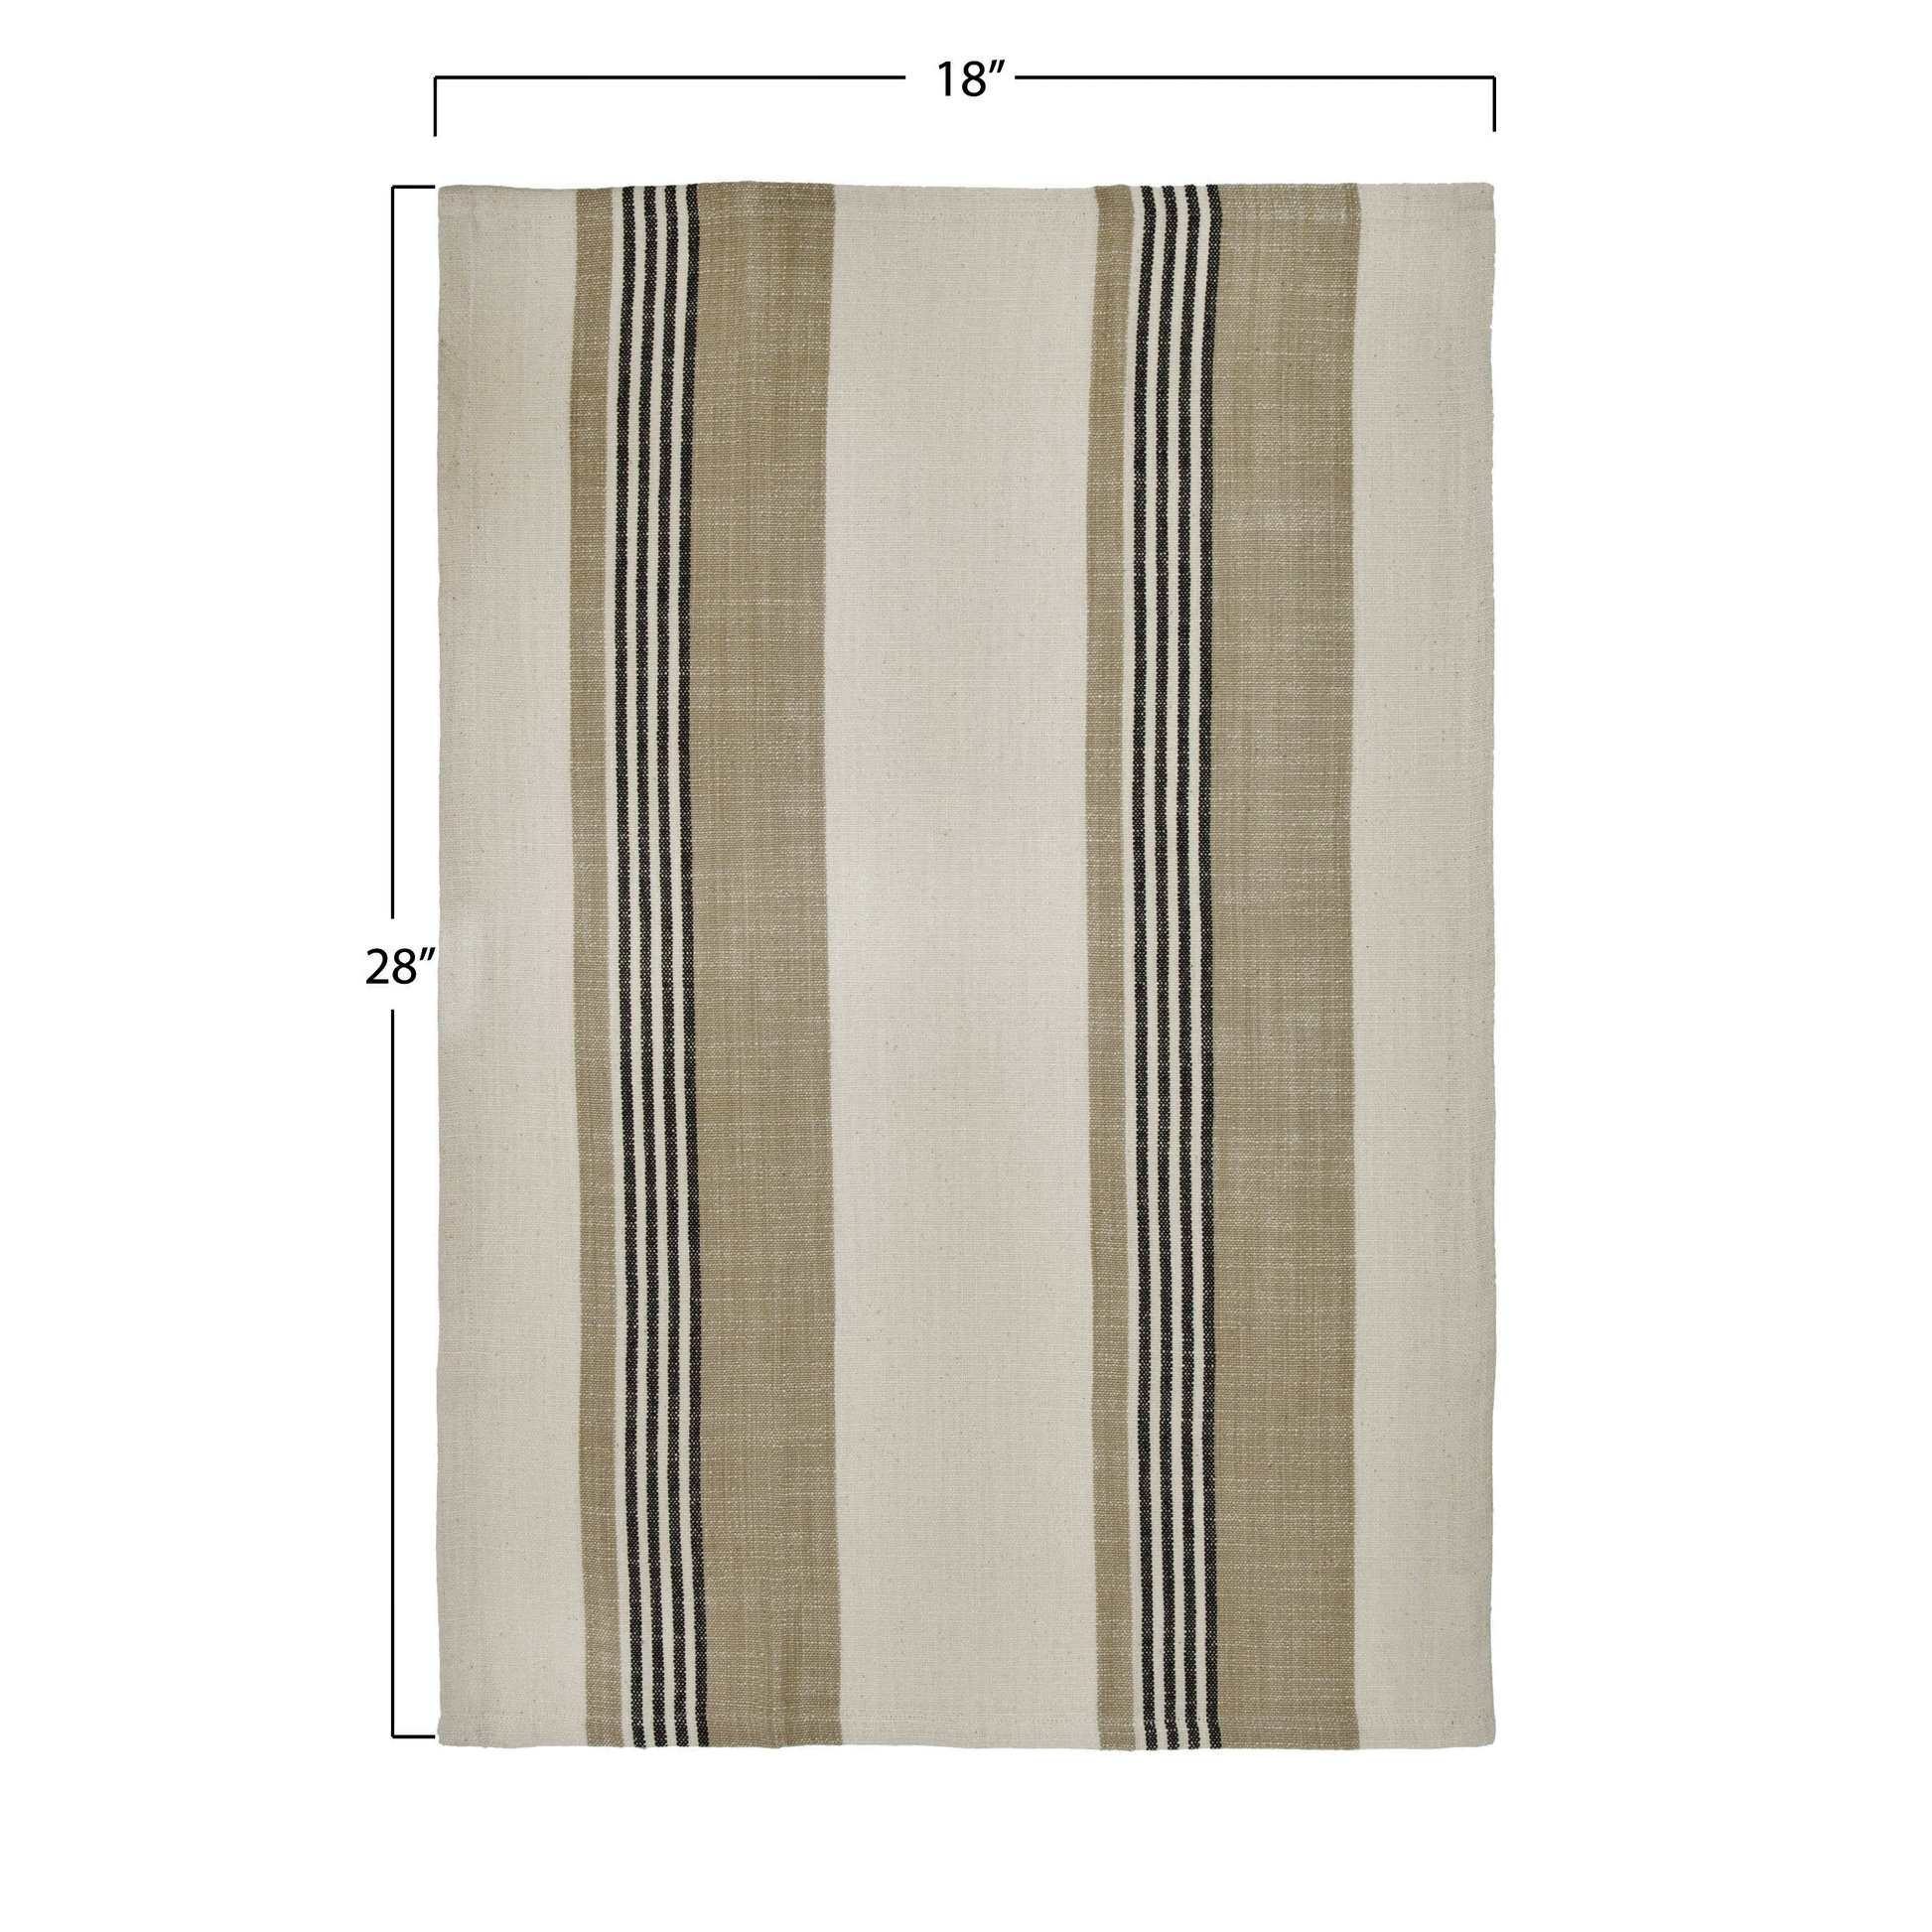 Woven Cotton Striped Tea Towels - Gray and Beige - Set of 3 - Mellow Monkey